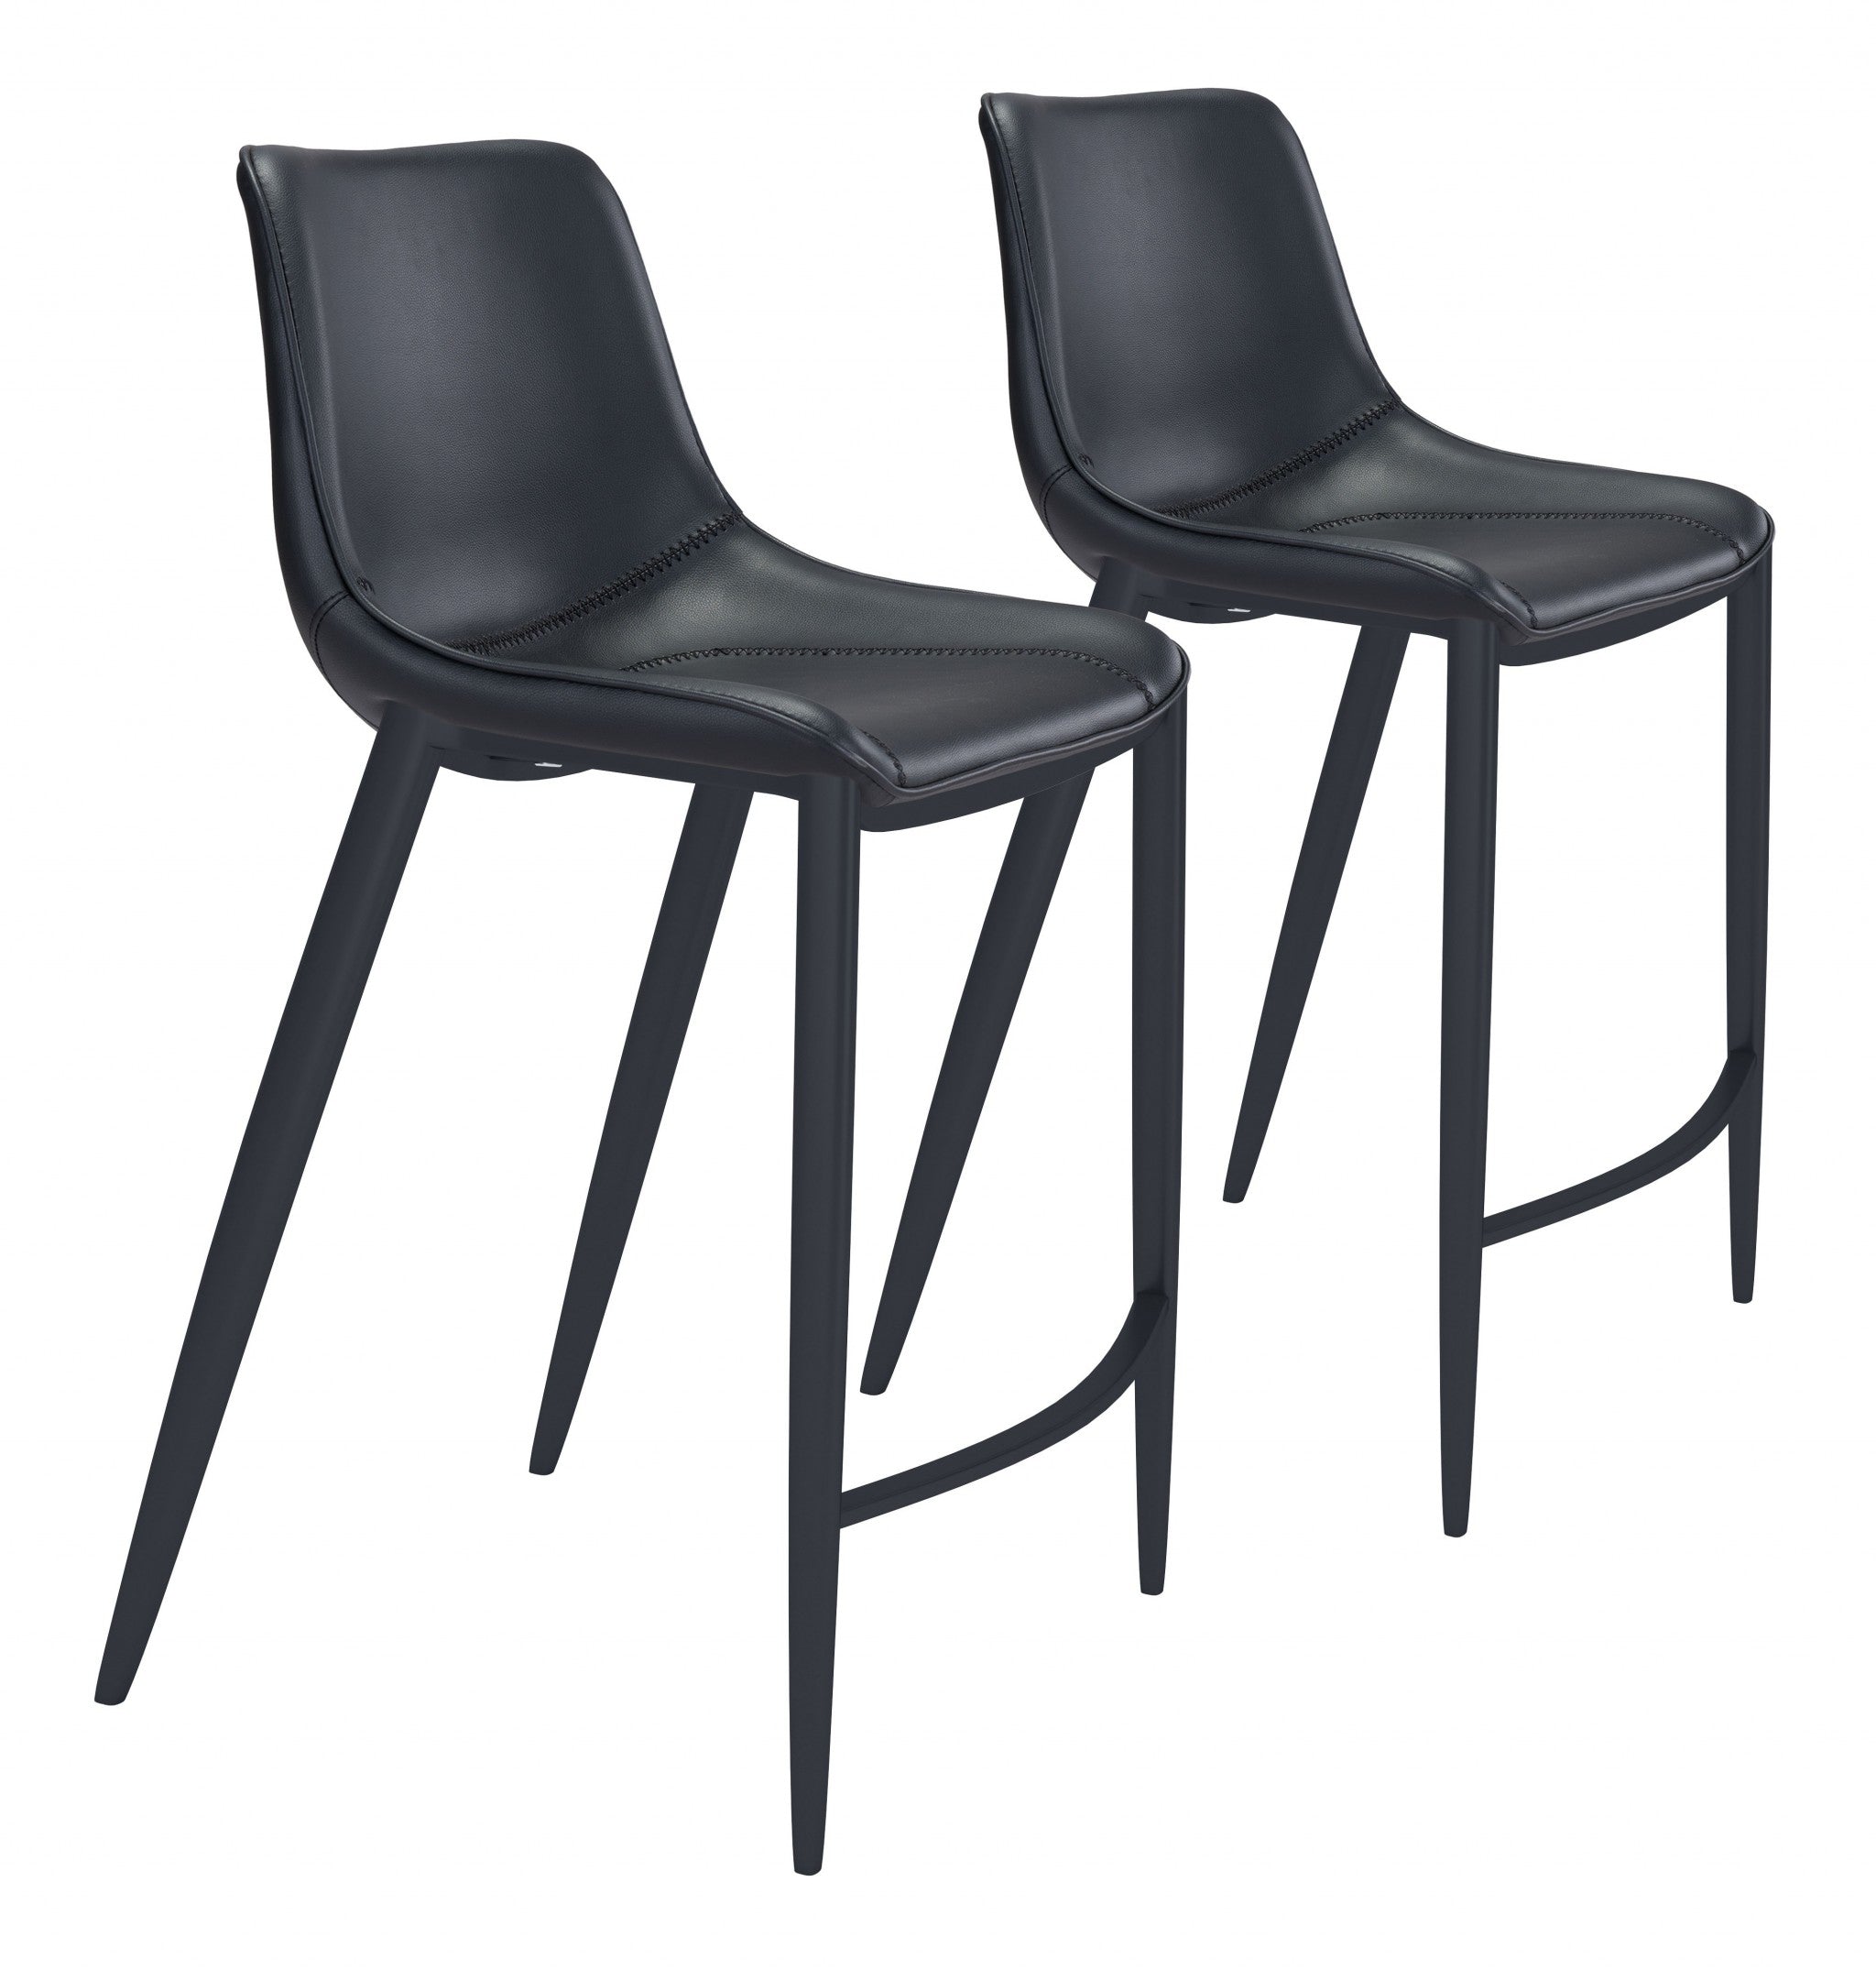 Set of Two 30" Black Steel Low Back Bar Height Bar Chairs